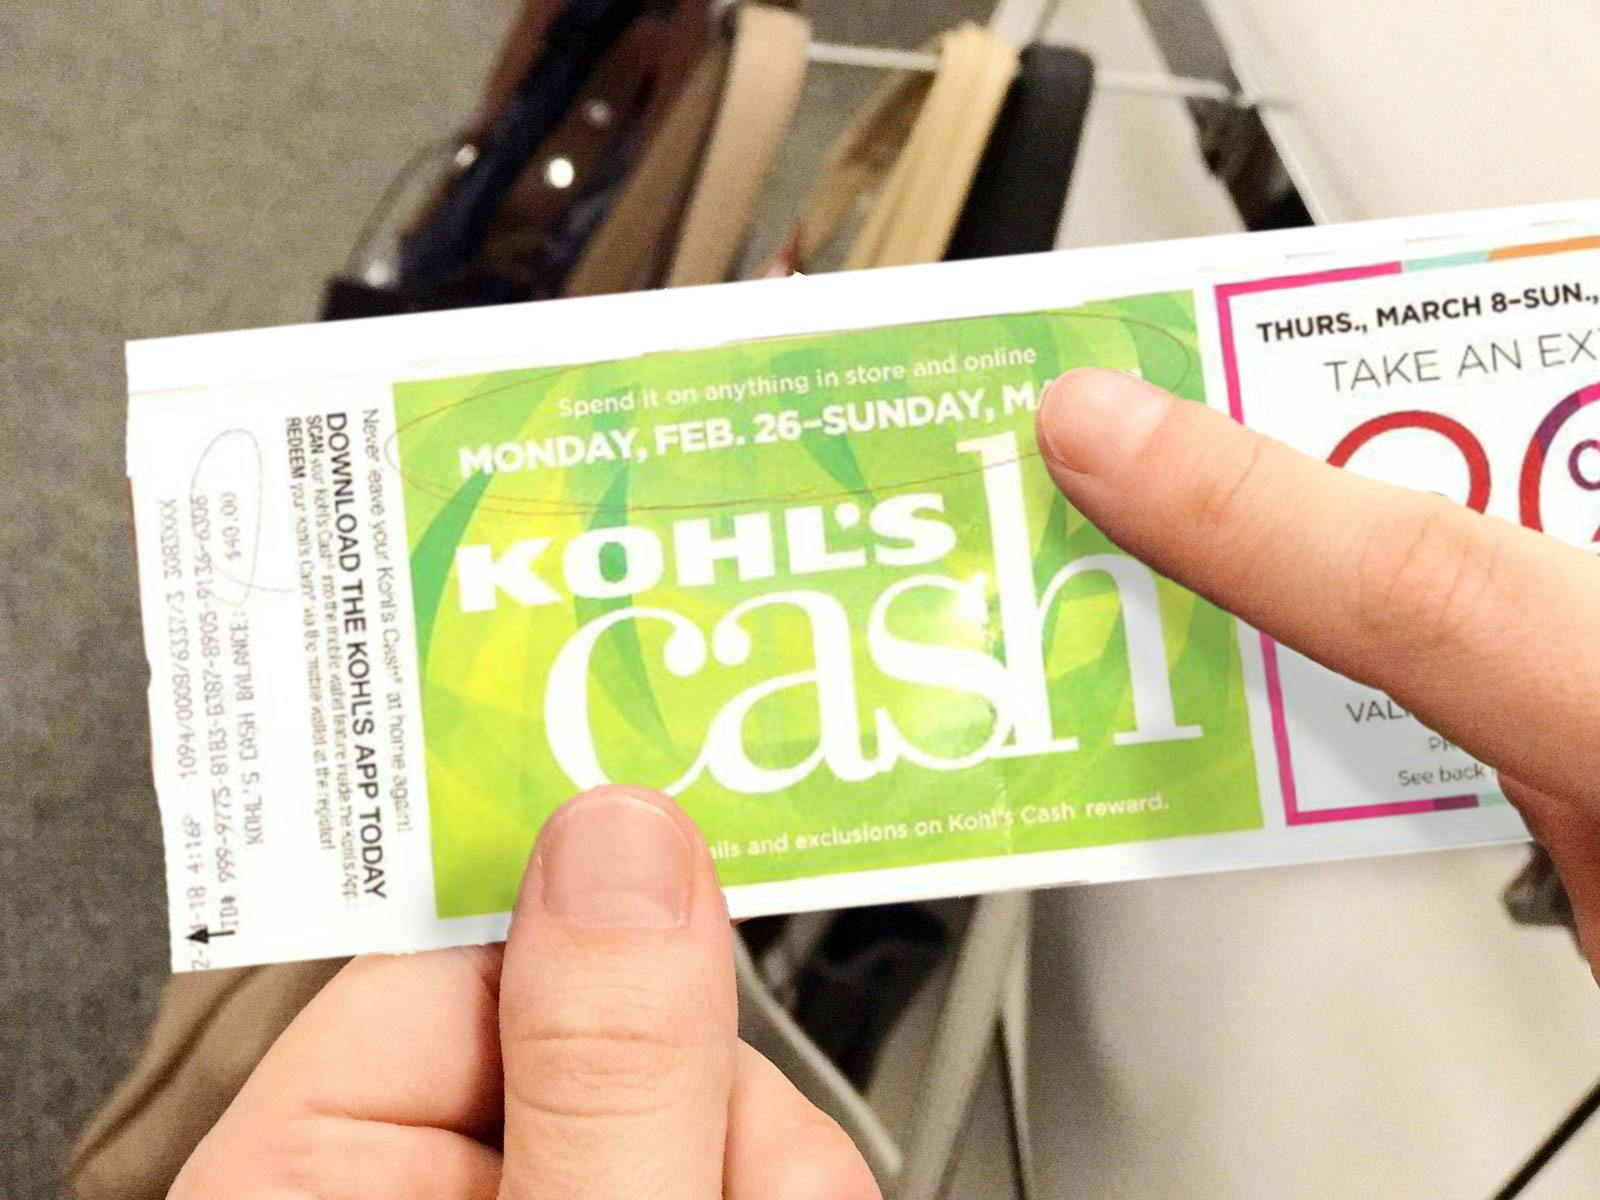 26 Easy Ways to Shop Smarter at Kohl's - The Krazy Coupon Lady